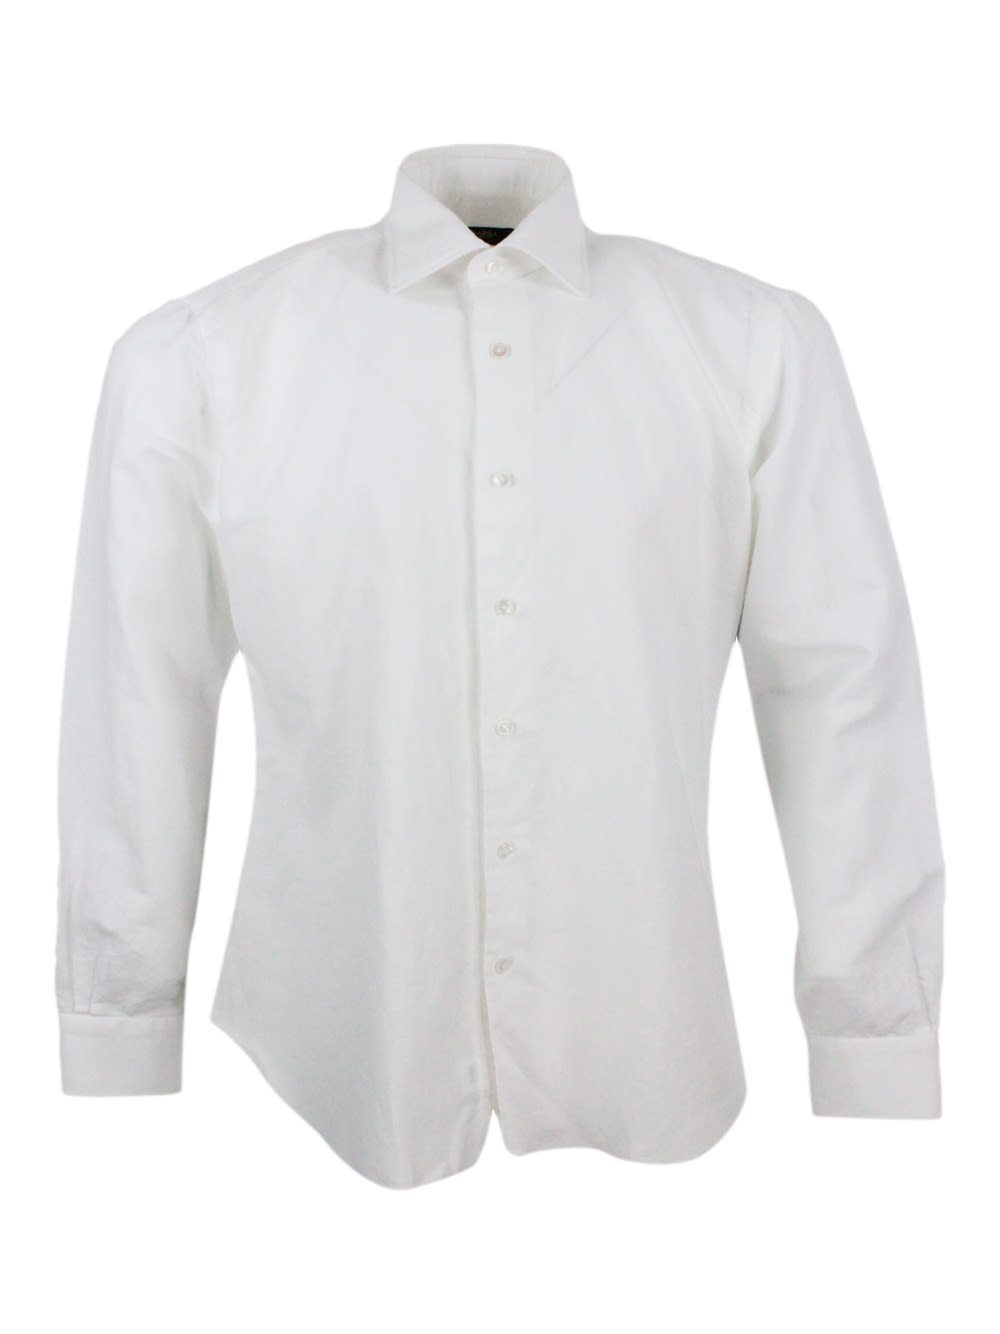 Barba Napoli Cult Shirt In Fine Cotton And Linen With Italian Collar And Hand-sewn With Mother-of-pearl Buttons In White